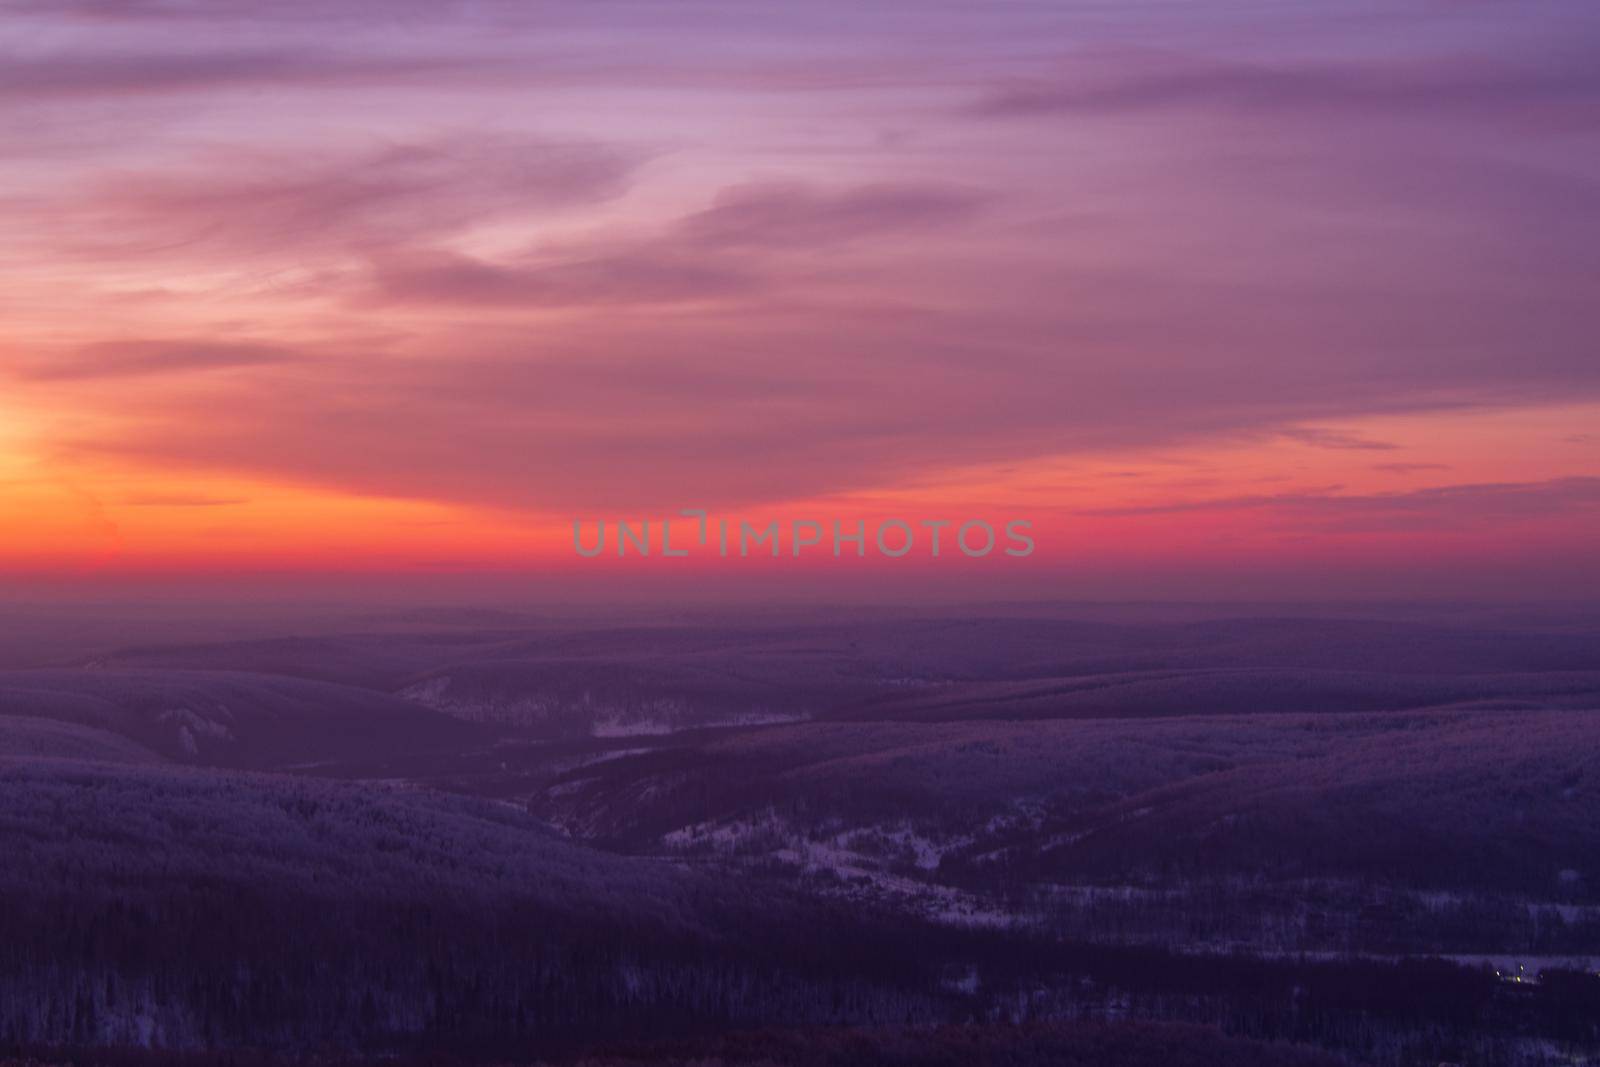 Epic red sunset over the rocks and stones of Ural mountains covered with snowy pines